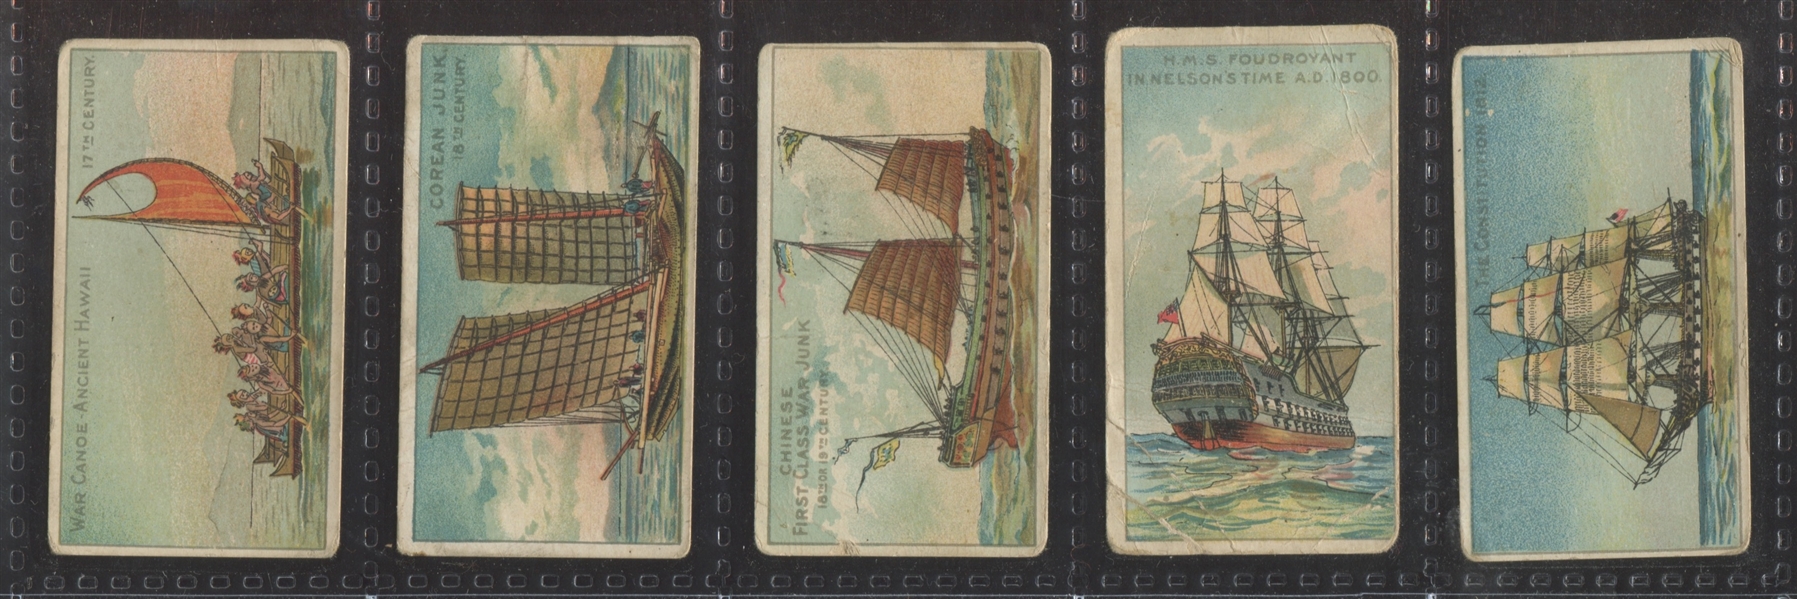 T418-1 American Tobacco Cards (ATC) Old and Ancient Ships - Series 1 Complete Set (25)